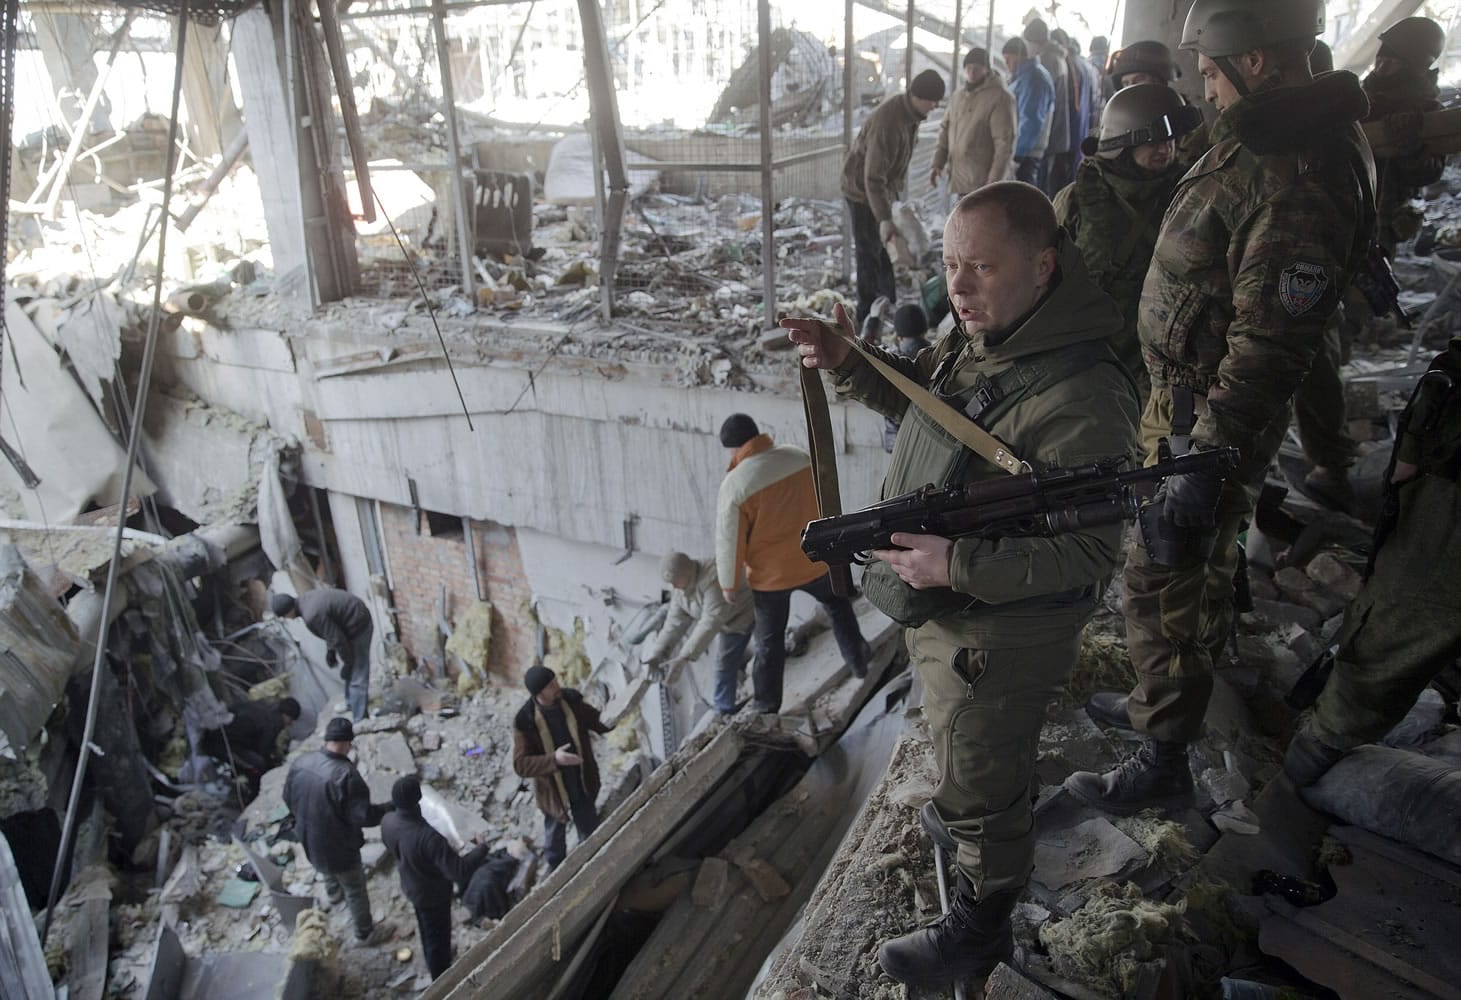 Vladimir Kononov, defense minister of the self-proclaimed Donetsk People's Republic, looks on as Ukrainian prisoners of war clear rubble Wednesday in a destroyed building of the airport outside Donetsk, Ukraine.